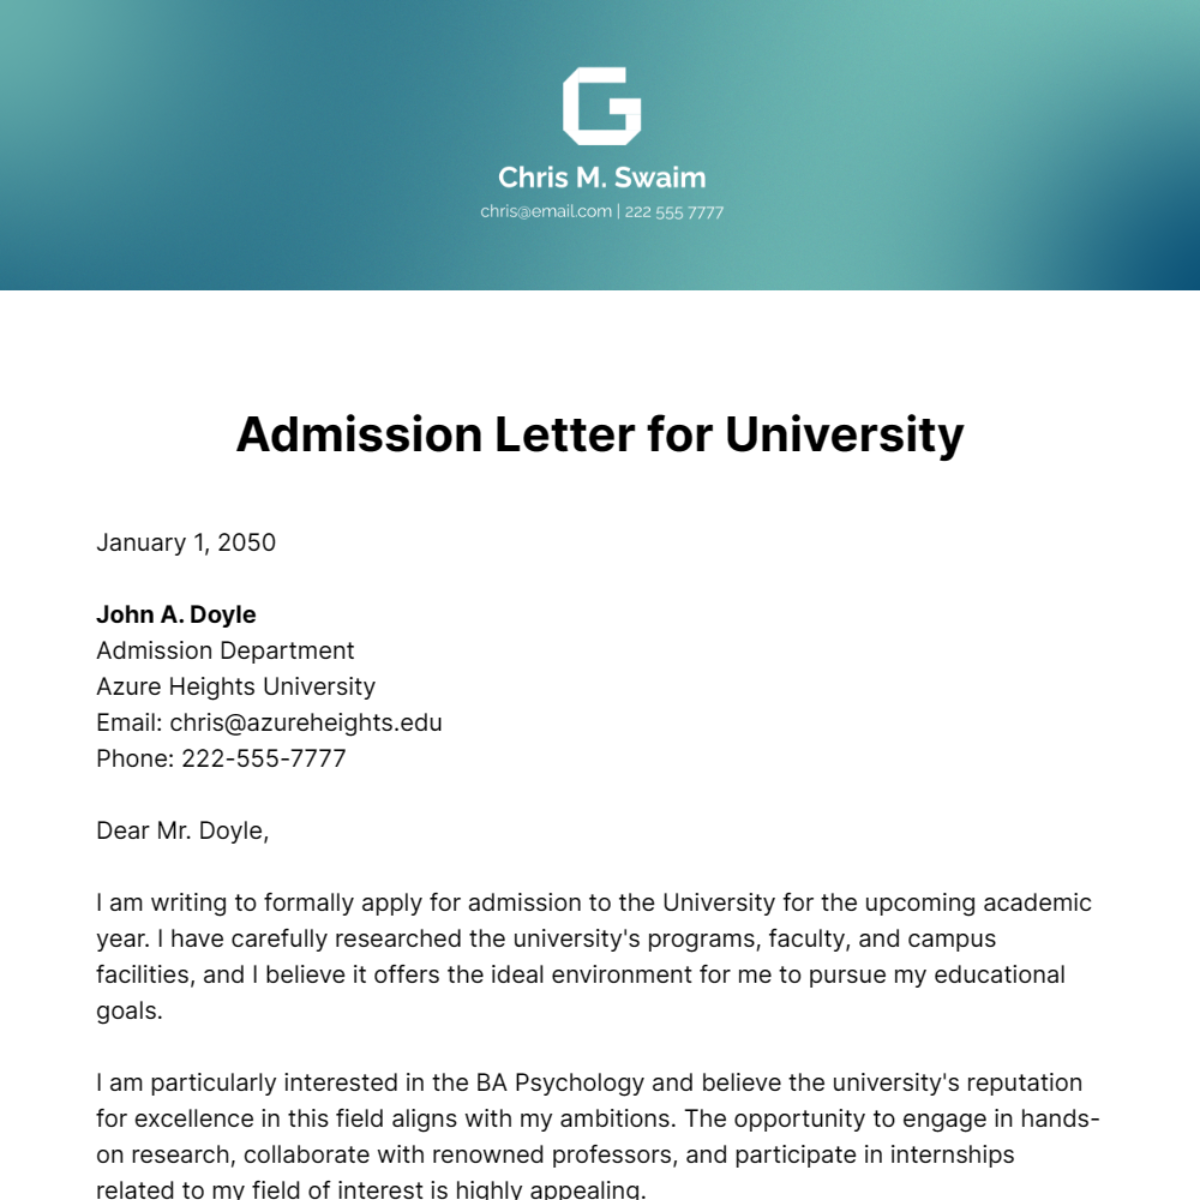 What to Expect: Understanding the Importance of a University Admission Letter